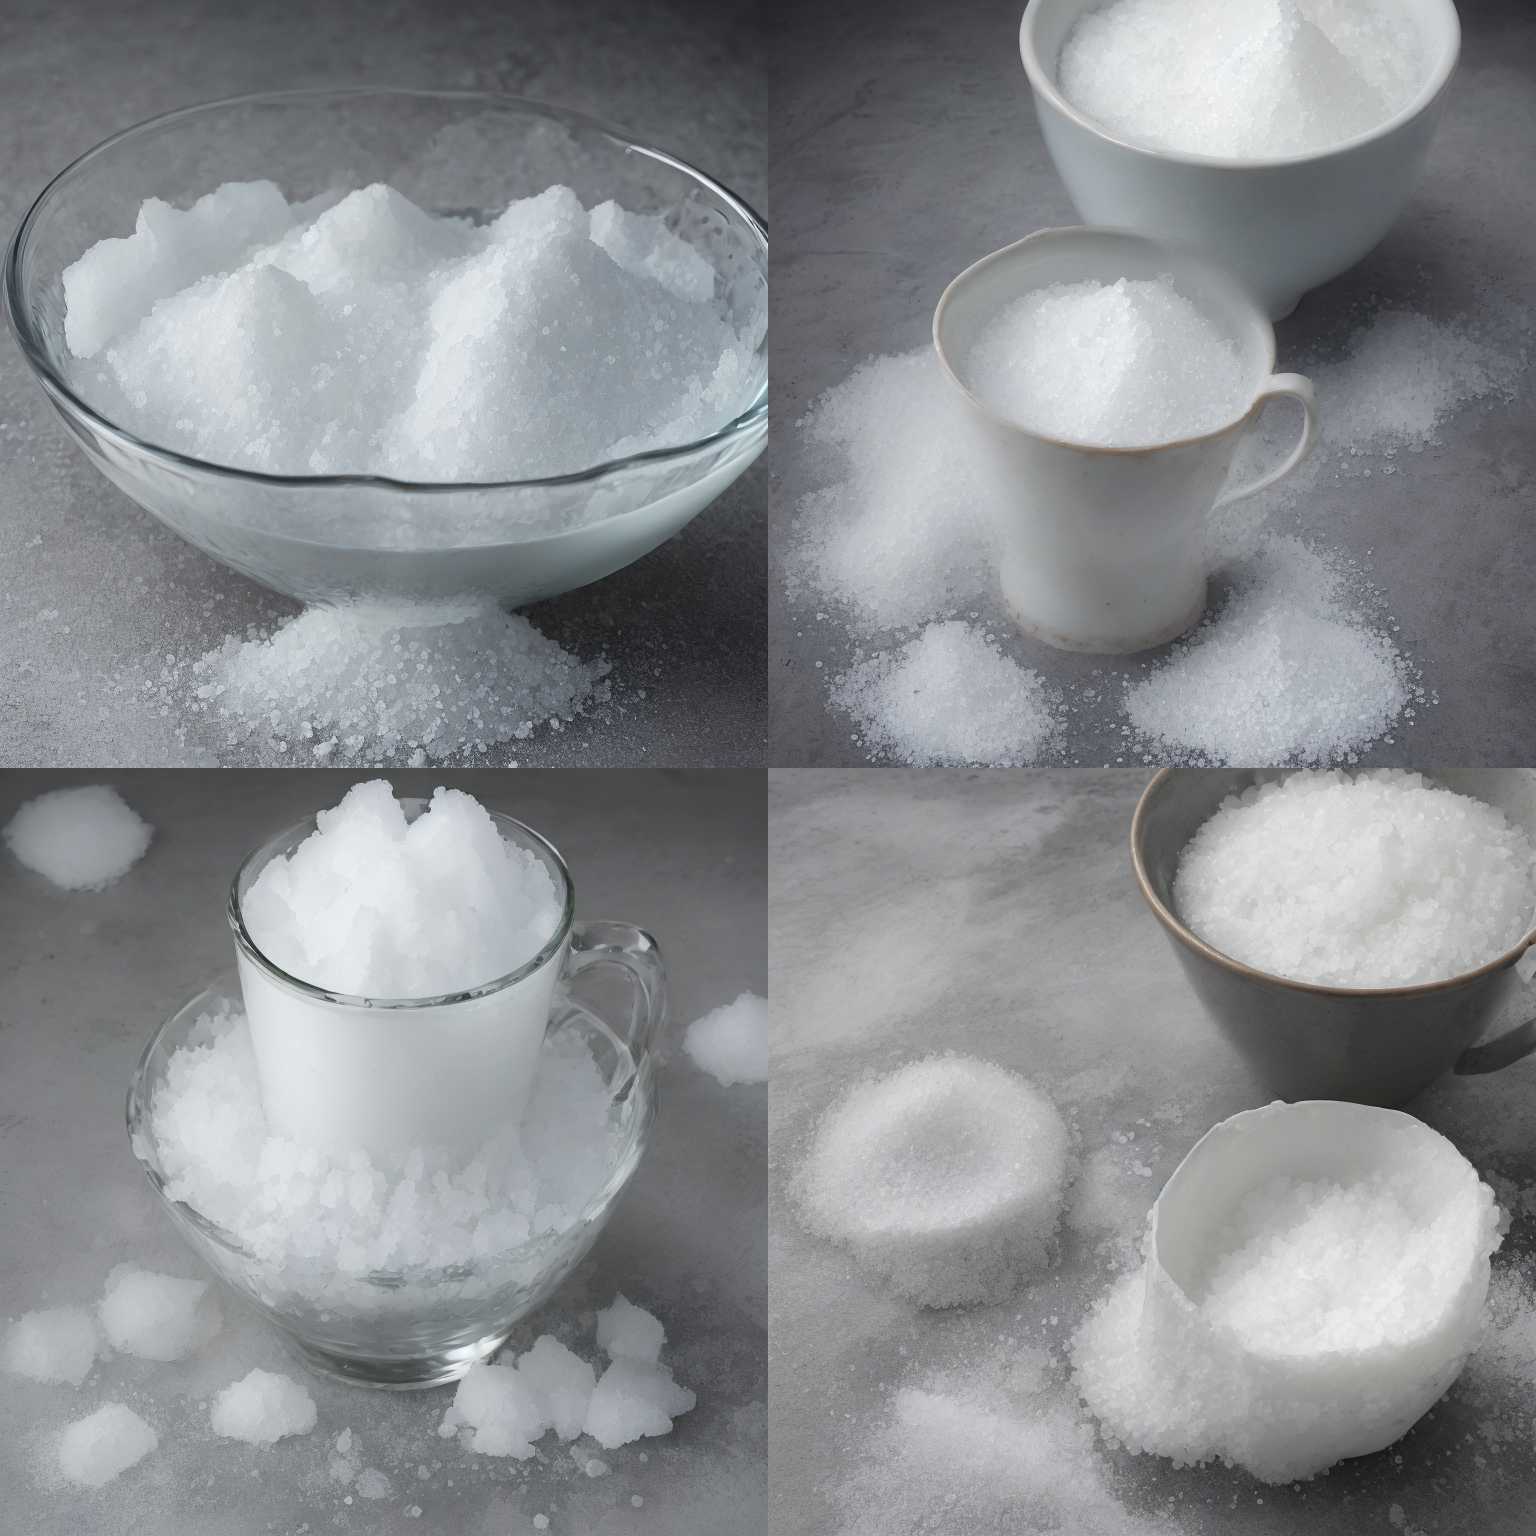 A cup of water properly mixed with salt